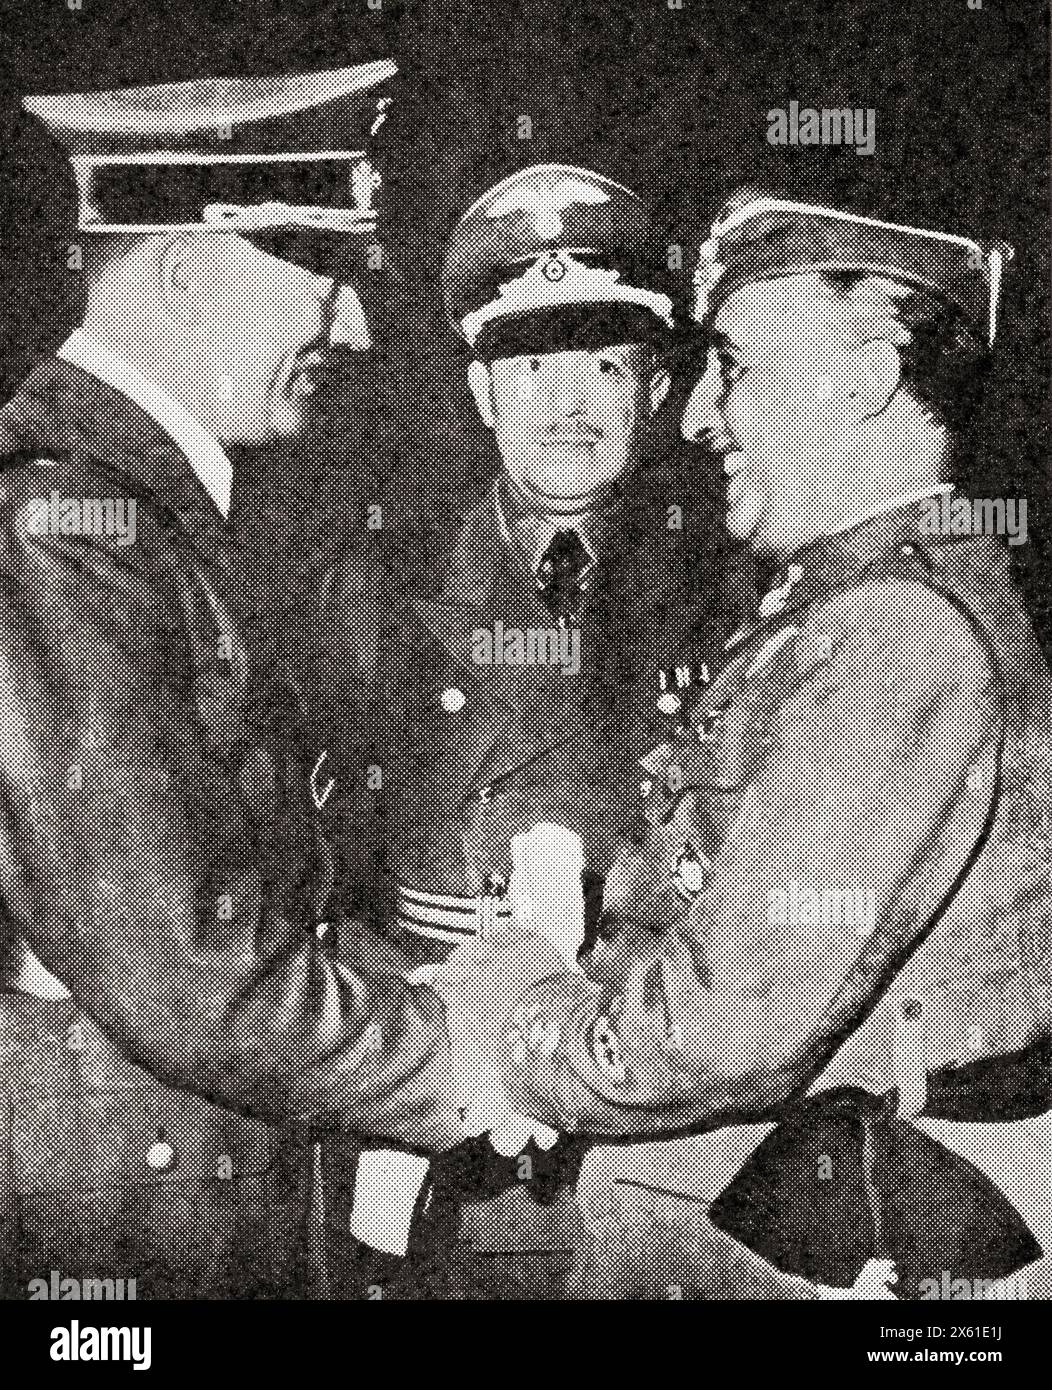 Hitler's meeting with Franco in an attempt to gain new allies, 23-28 October, 1940.  Adolf Hitler, 1889 – 1945. German politician, demagogue, Pan-German revolutionary, leader of the Nazi Party, Chancellor of Germany, and Führer of Nazi Germany from 1934 to 1945.  Francisco Franco Bahamonde, aka El Caudillo, 1892 – 1975.  Spanish military general, ruler of Spain from 1939 to 1975 as a dictator. From The War in Pictures, Sixth Year. Stock Photo